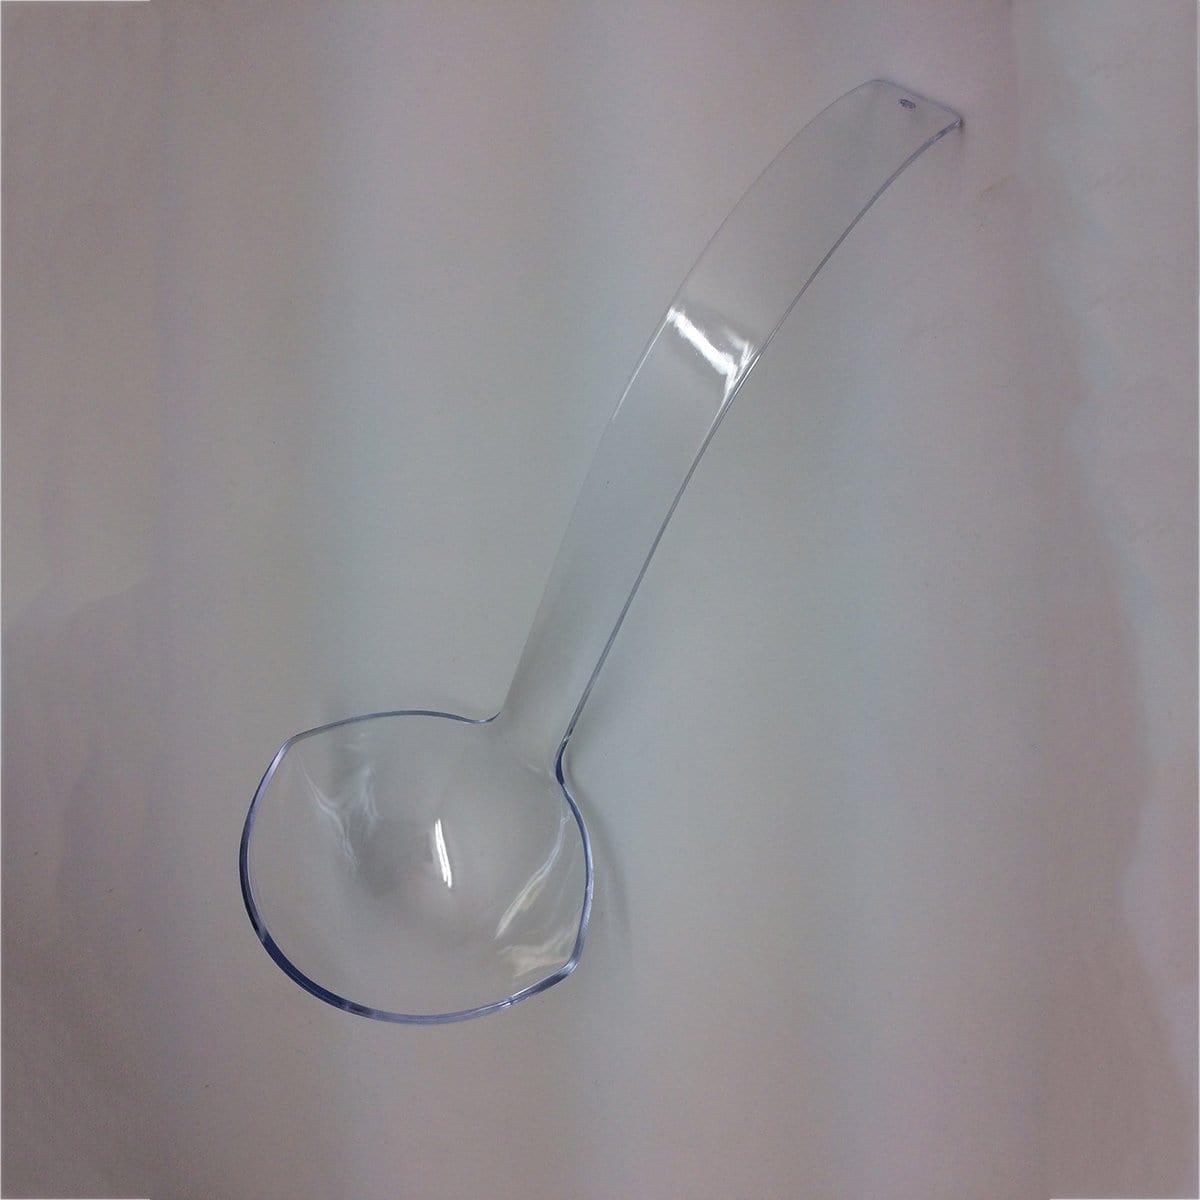 Buy Plasticware Large Ladle 5 oz sold at Party Expert